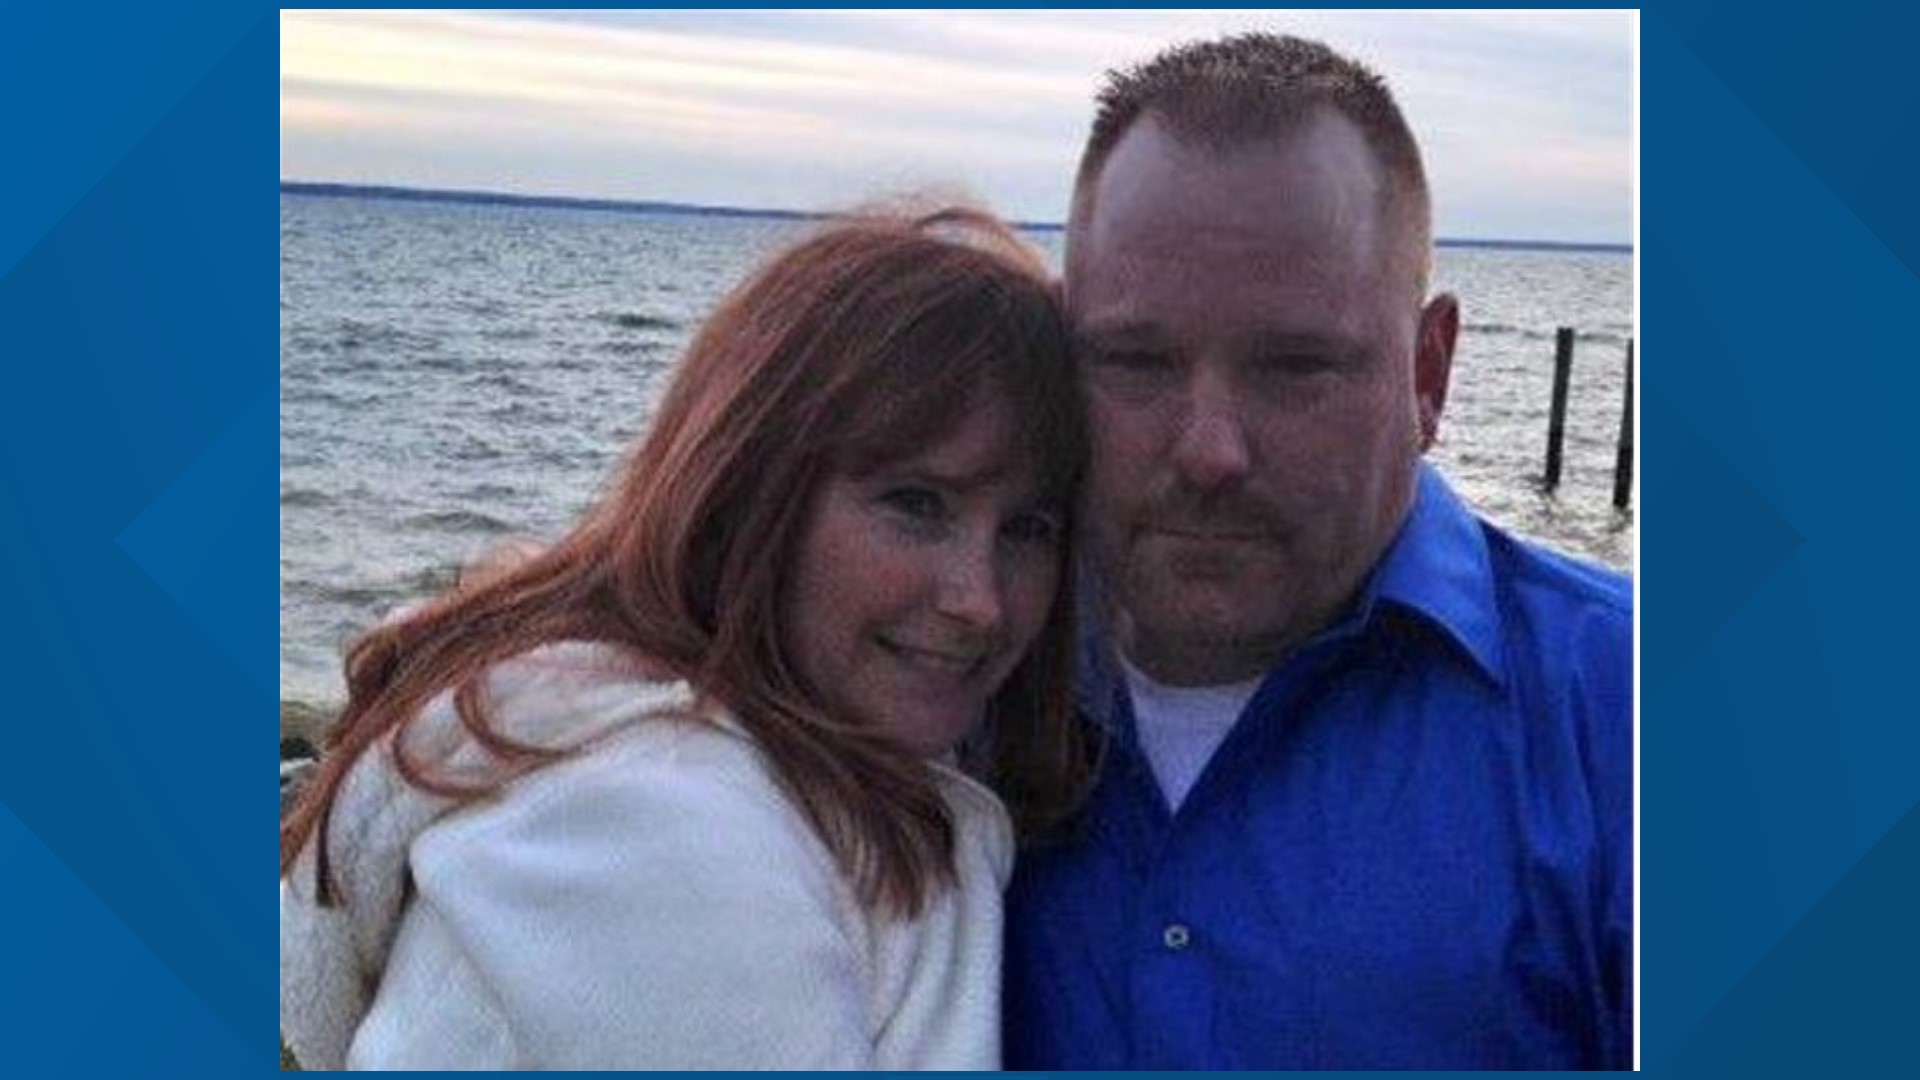 Doug Hand was last heard from around 4:30 p.m. Wednesday, when he talked to his wife. His boat was found aground on a shoreline in Virginia Thursday.